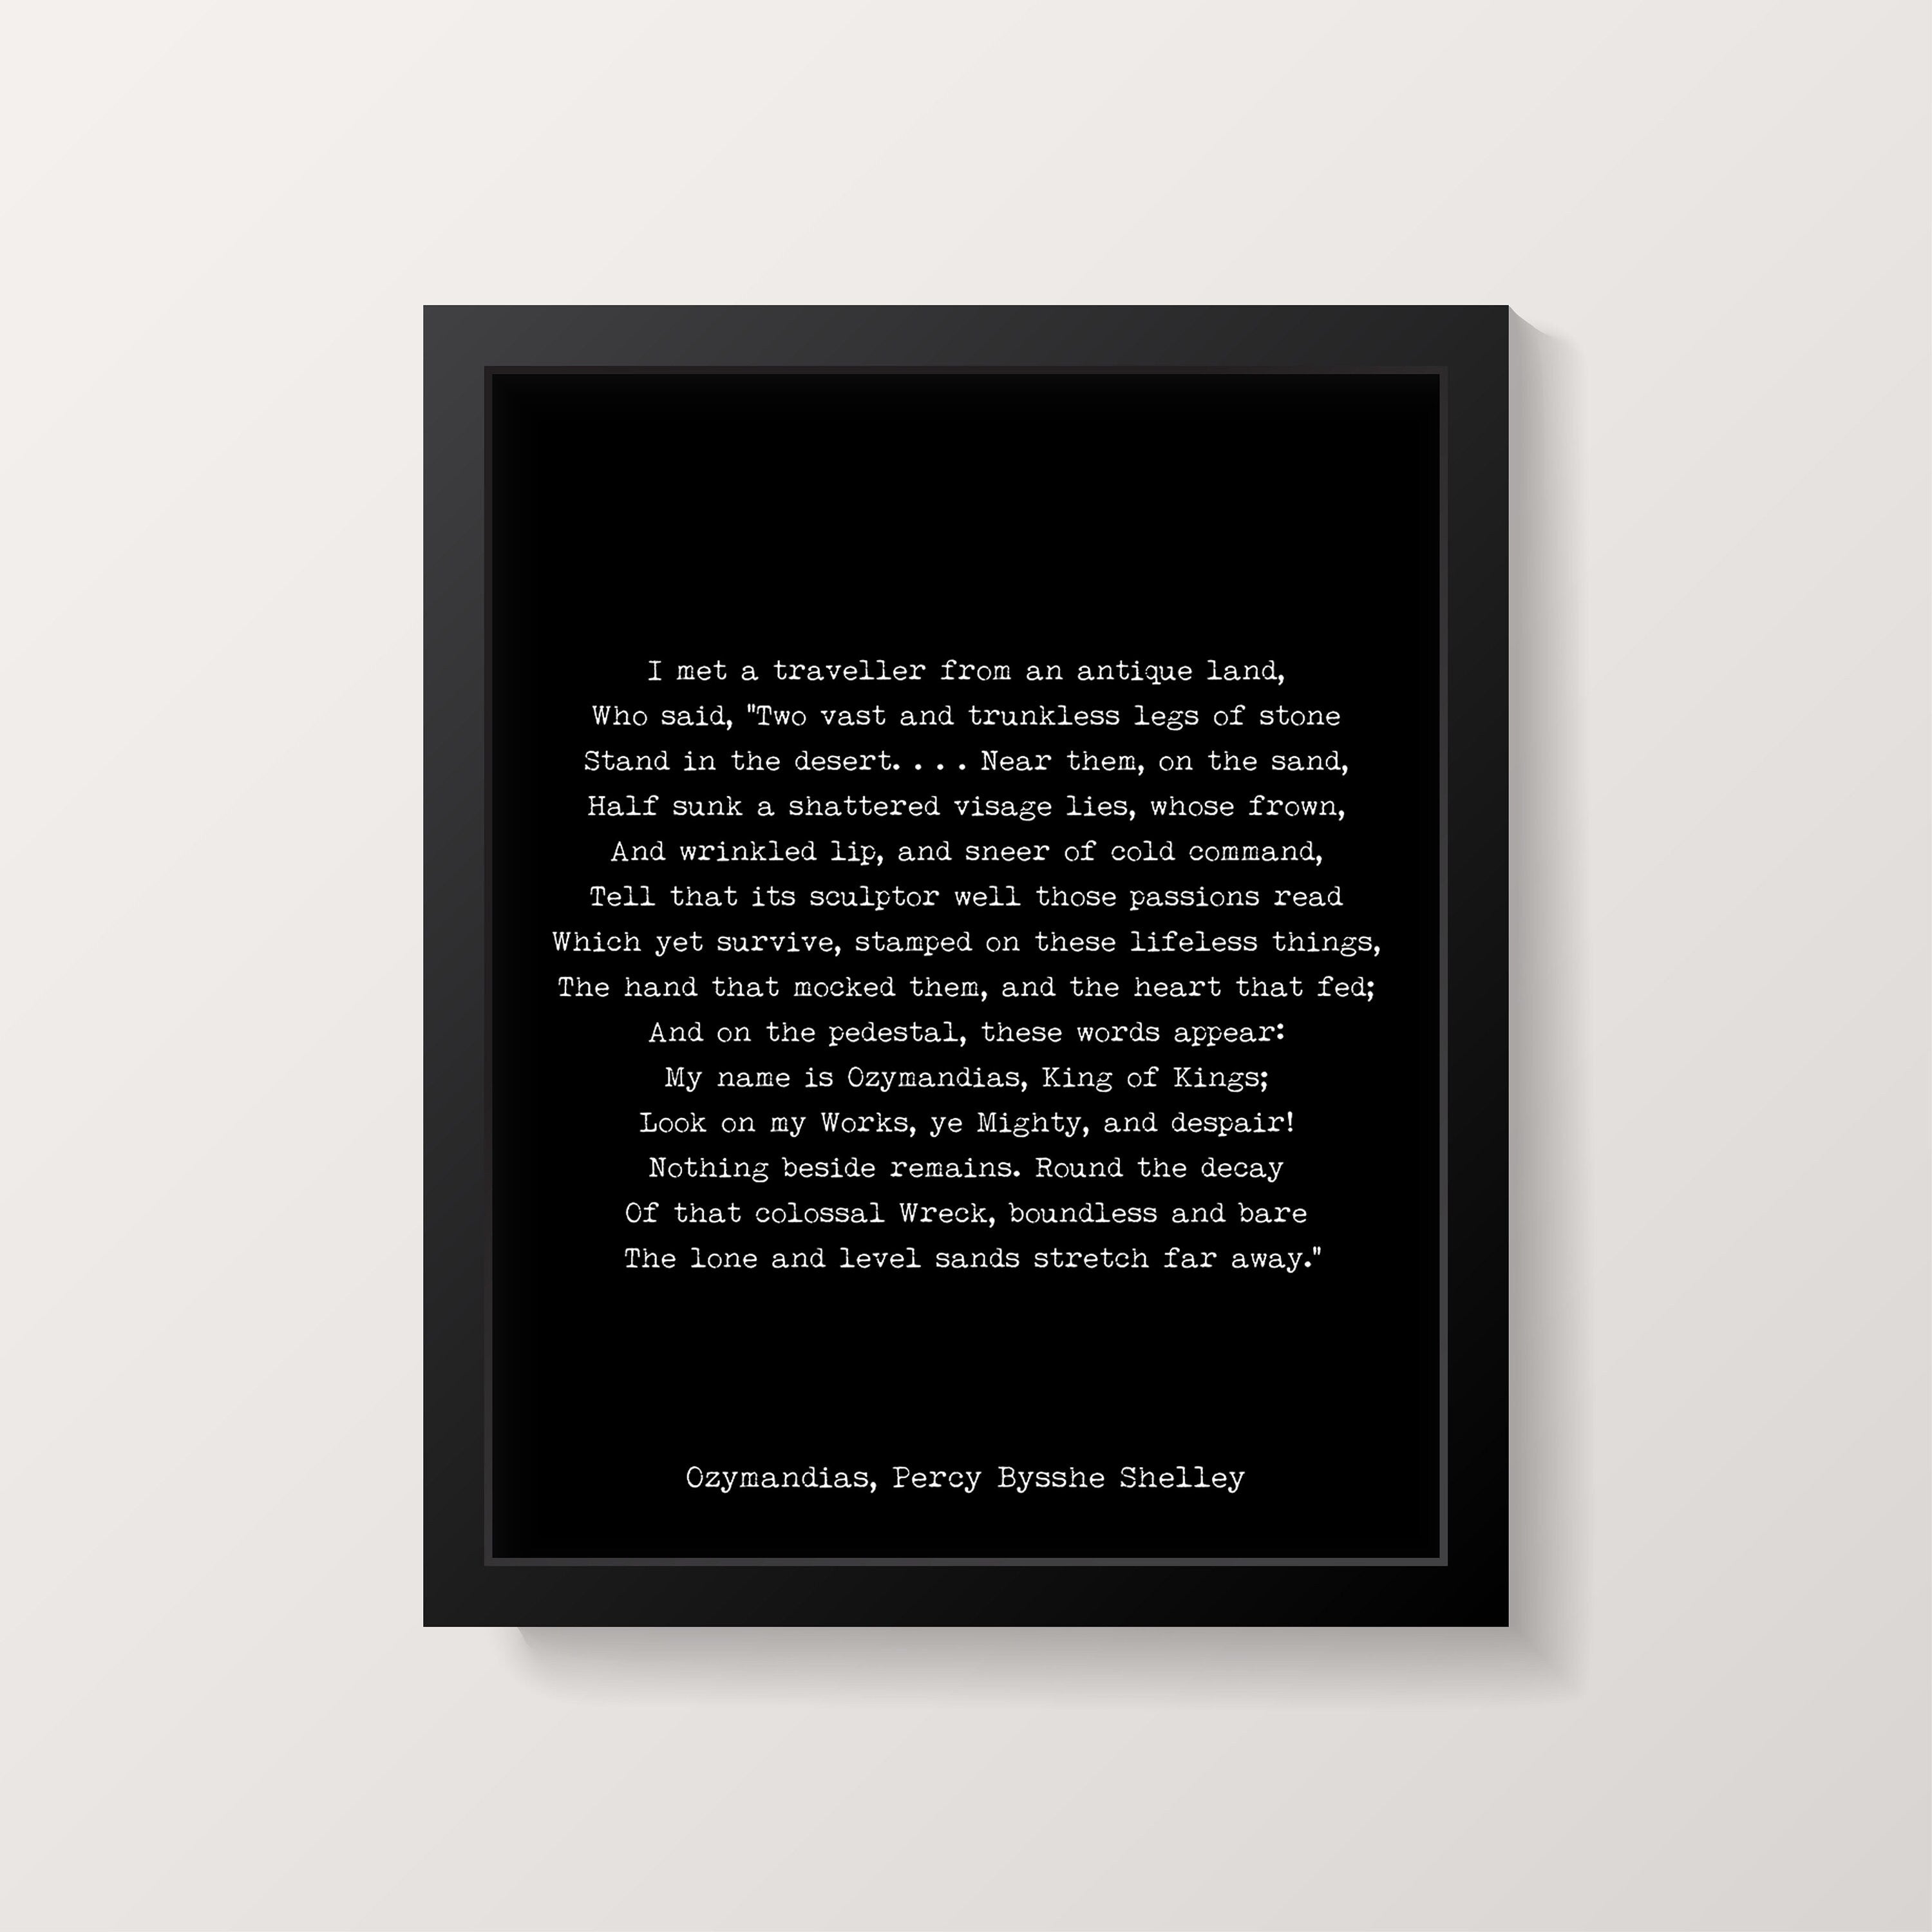 Ozymandias Poem Print, Percy Bysshe Shelley Poetry Poster in Black & White for Home Wall Decor